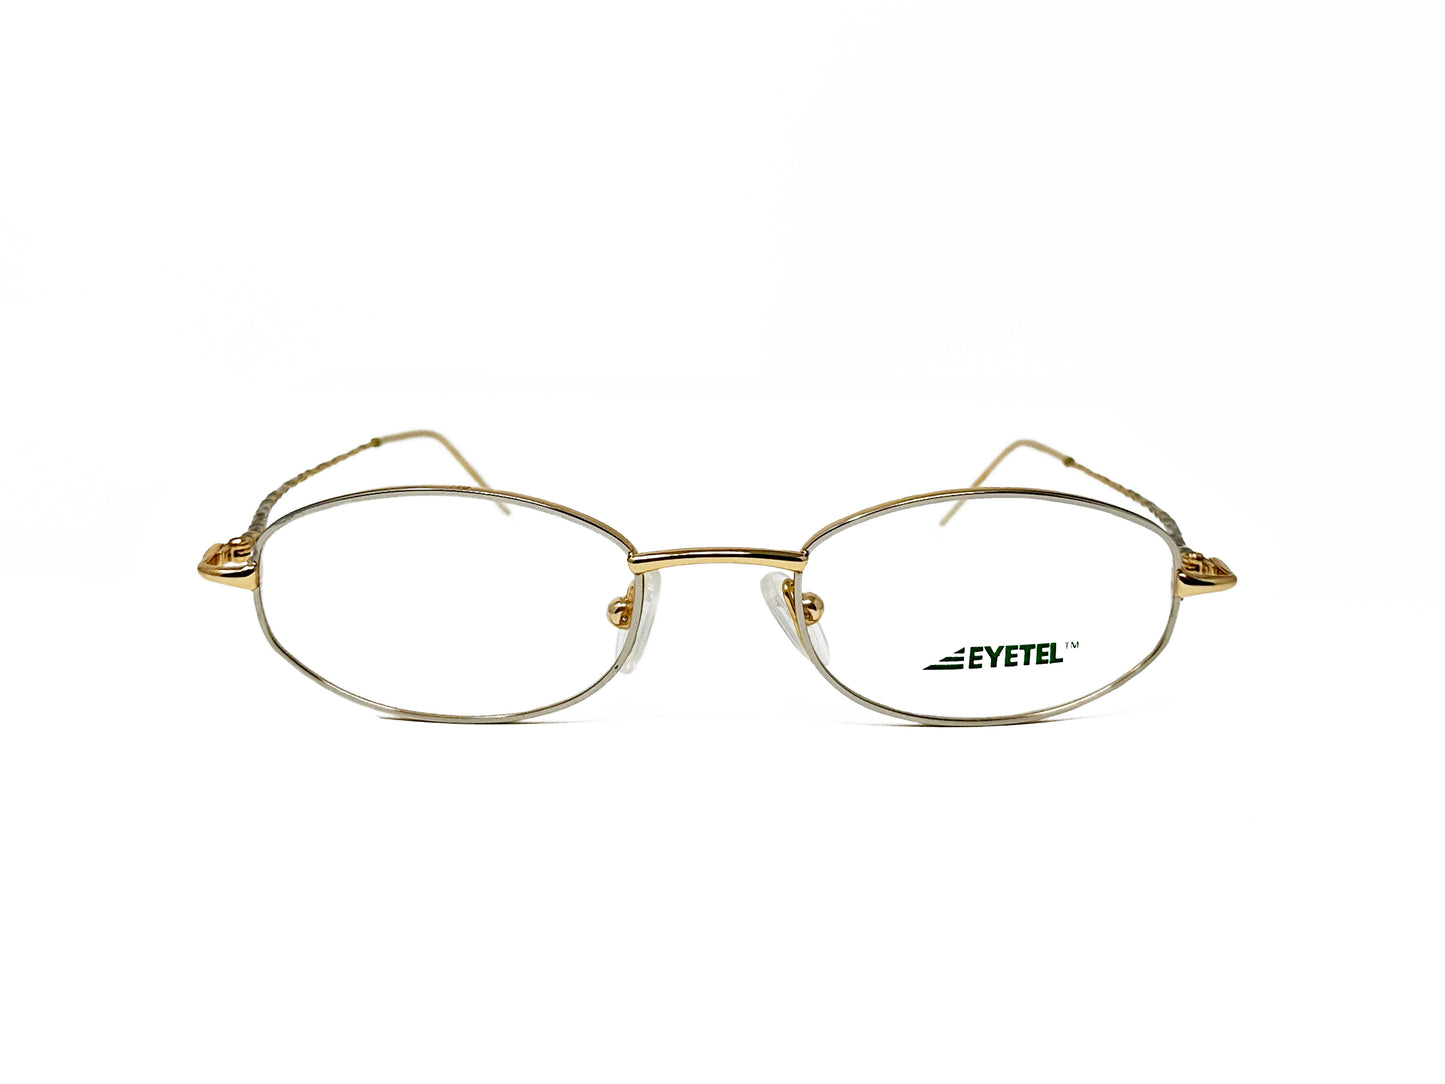 Eyetel oval, with slight angles, metal optical frame. Model: Bach. Color: 425 - White gold. Front view. 